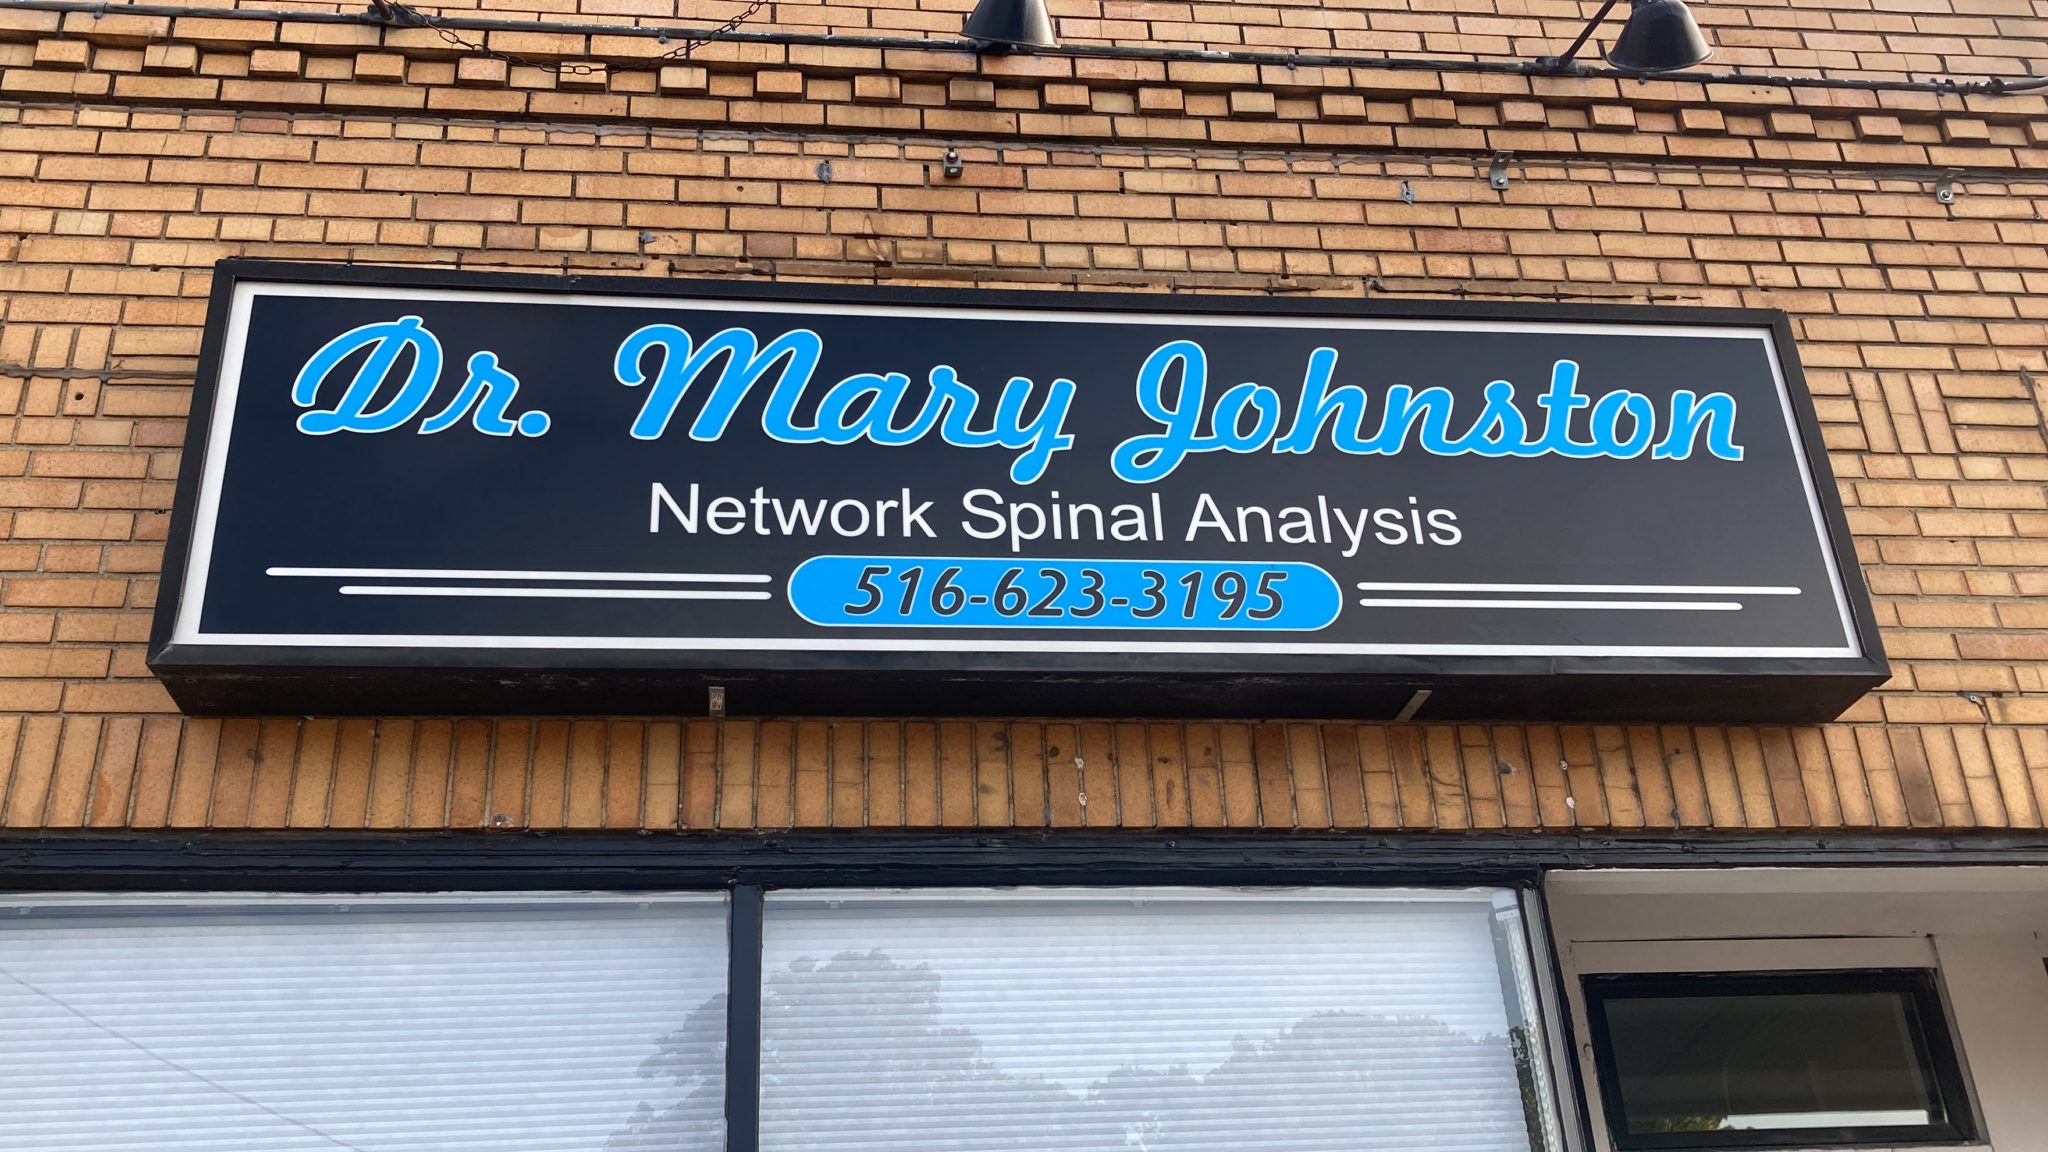 Network Spinal – Dr Mary Johnston